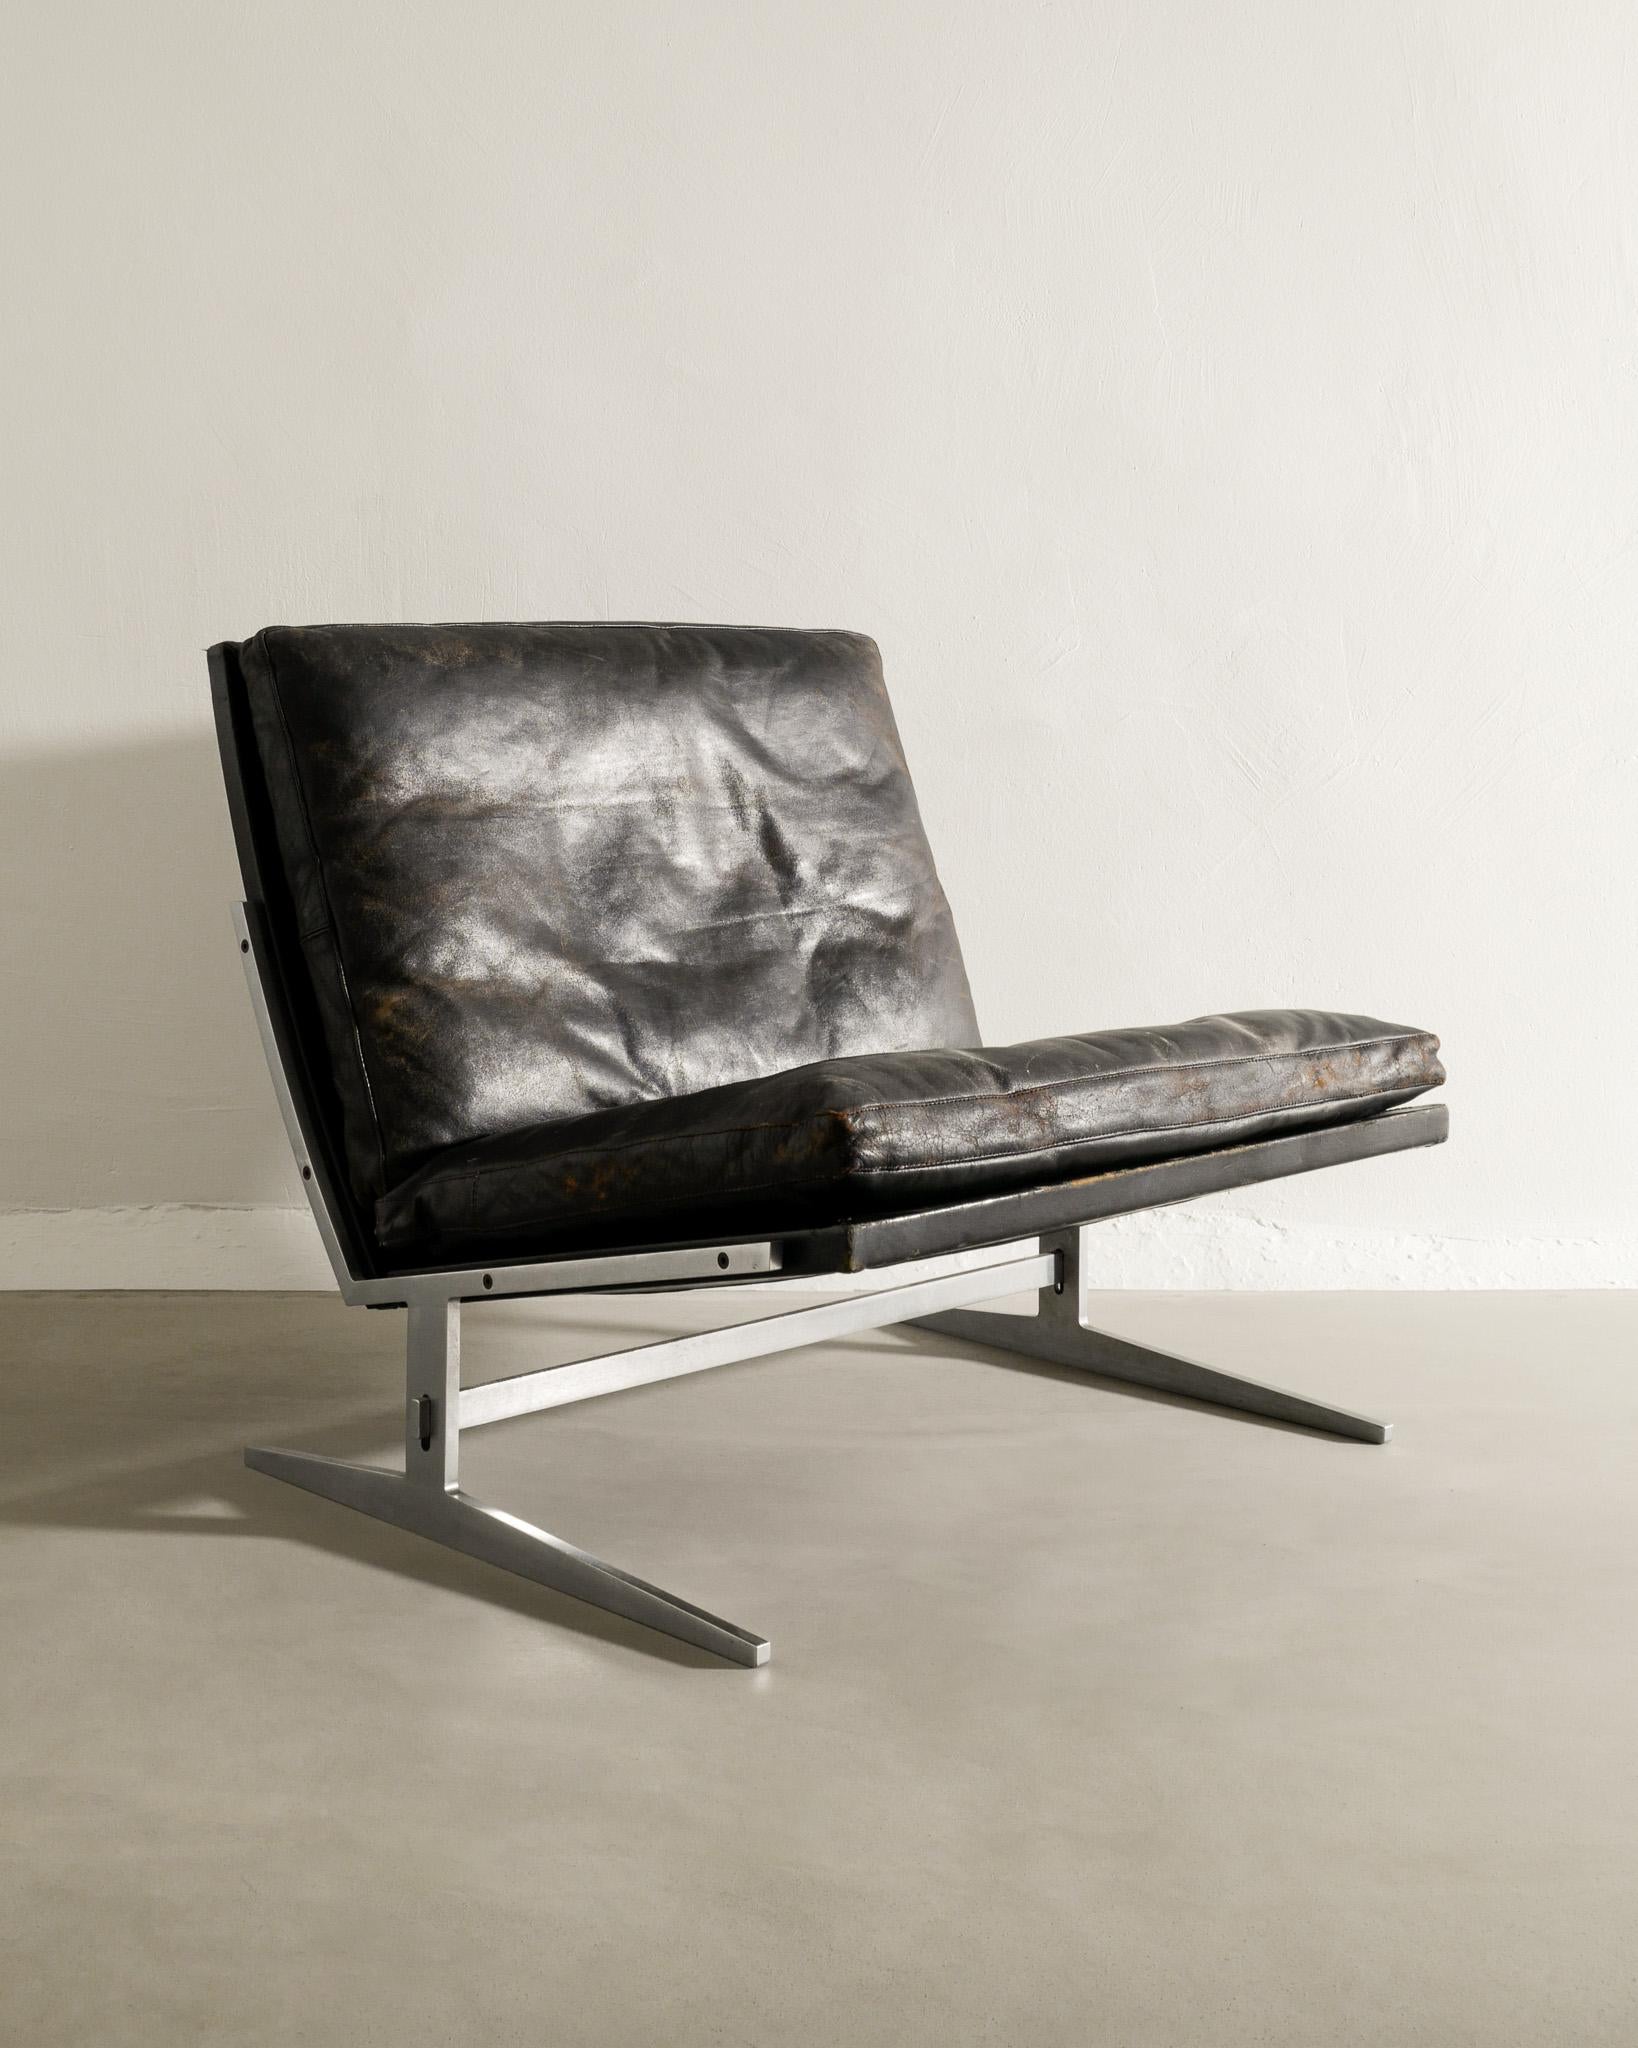 Rare Scandinavian mid century arm / easy chair in steel and original black leather by Jørgen Kastholm & Prefen Fabricius produced by Bo-Ex Denmark, 1960s. Original condition with patina from age and use. The leather is worn but not damaged.